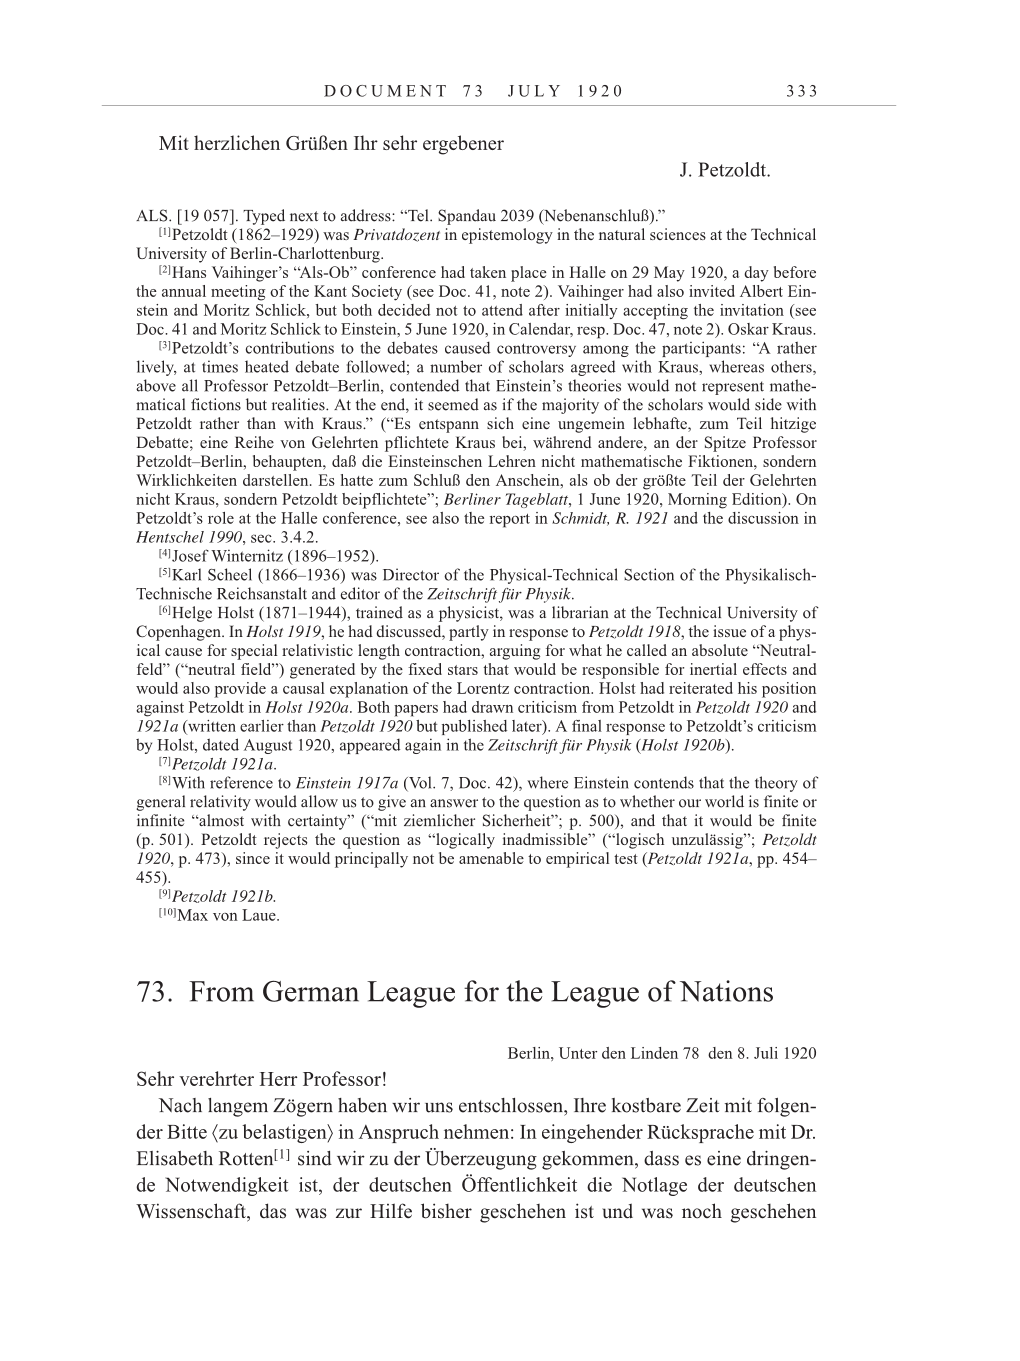 Volume 10: The Berlin Years: Correspondence May-December 1920 / Supplementary Correspondence 1909-1920 page 333